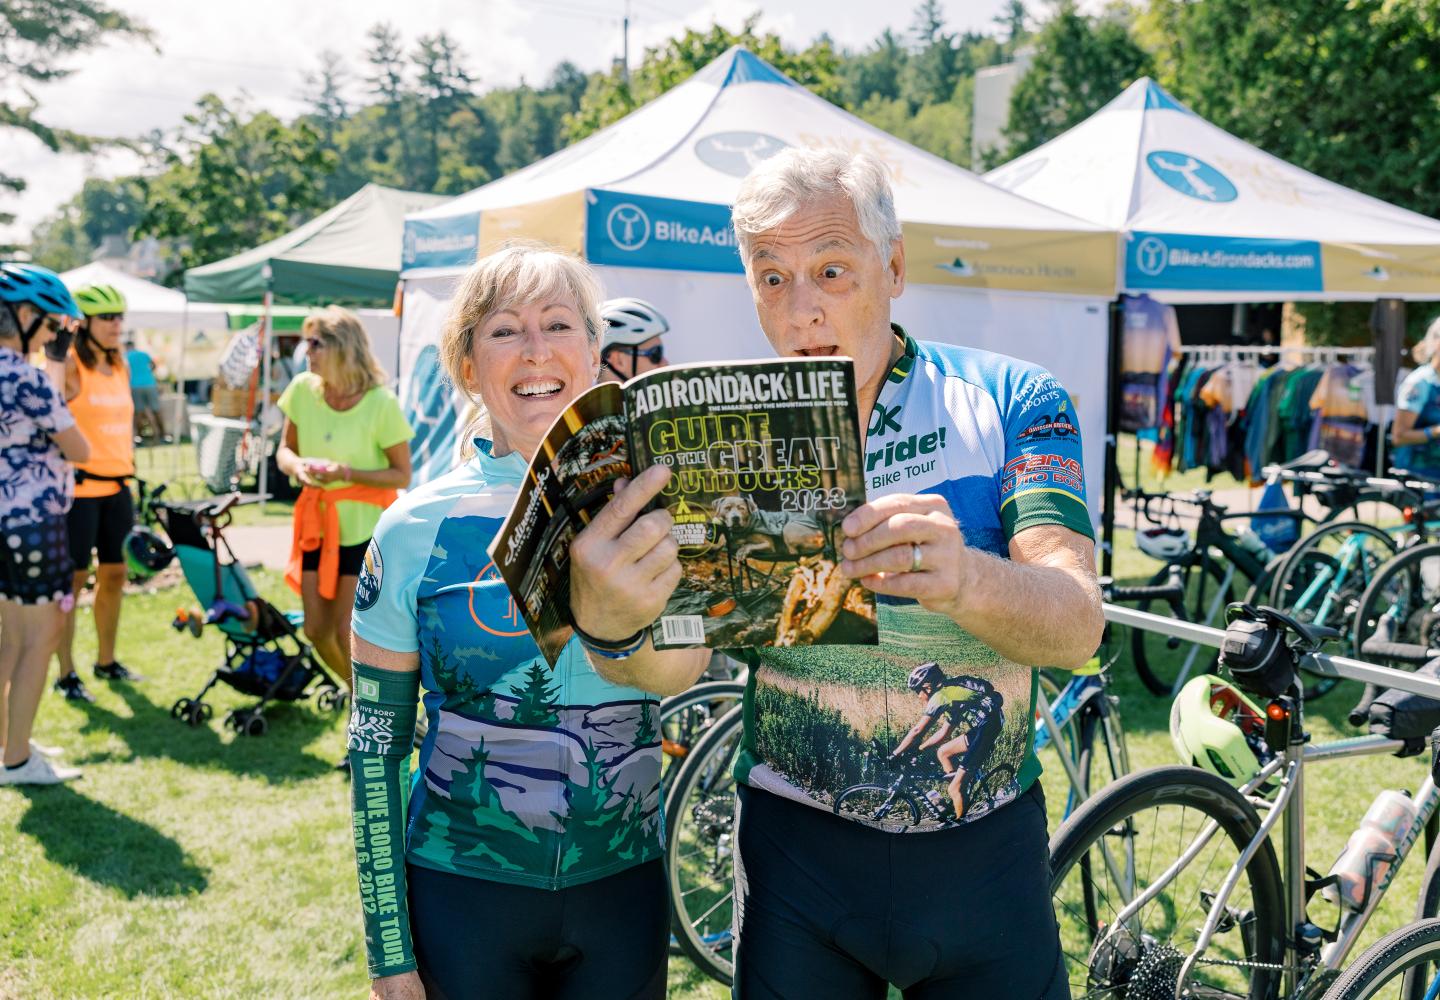 The Adirondack Gearzette is a free digital newsletter feature news and information about all things bikes in and around the Adirondack region.